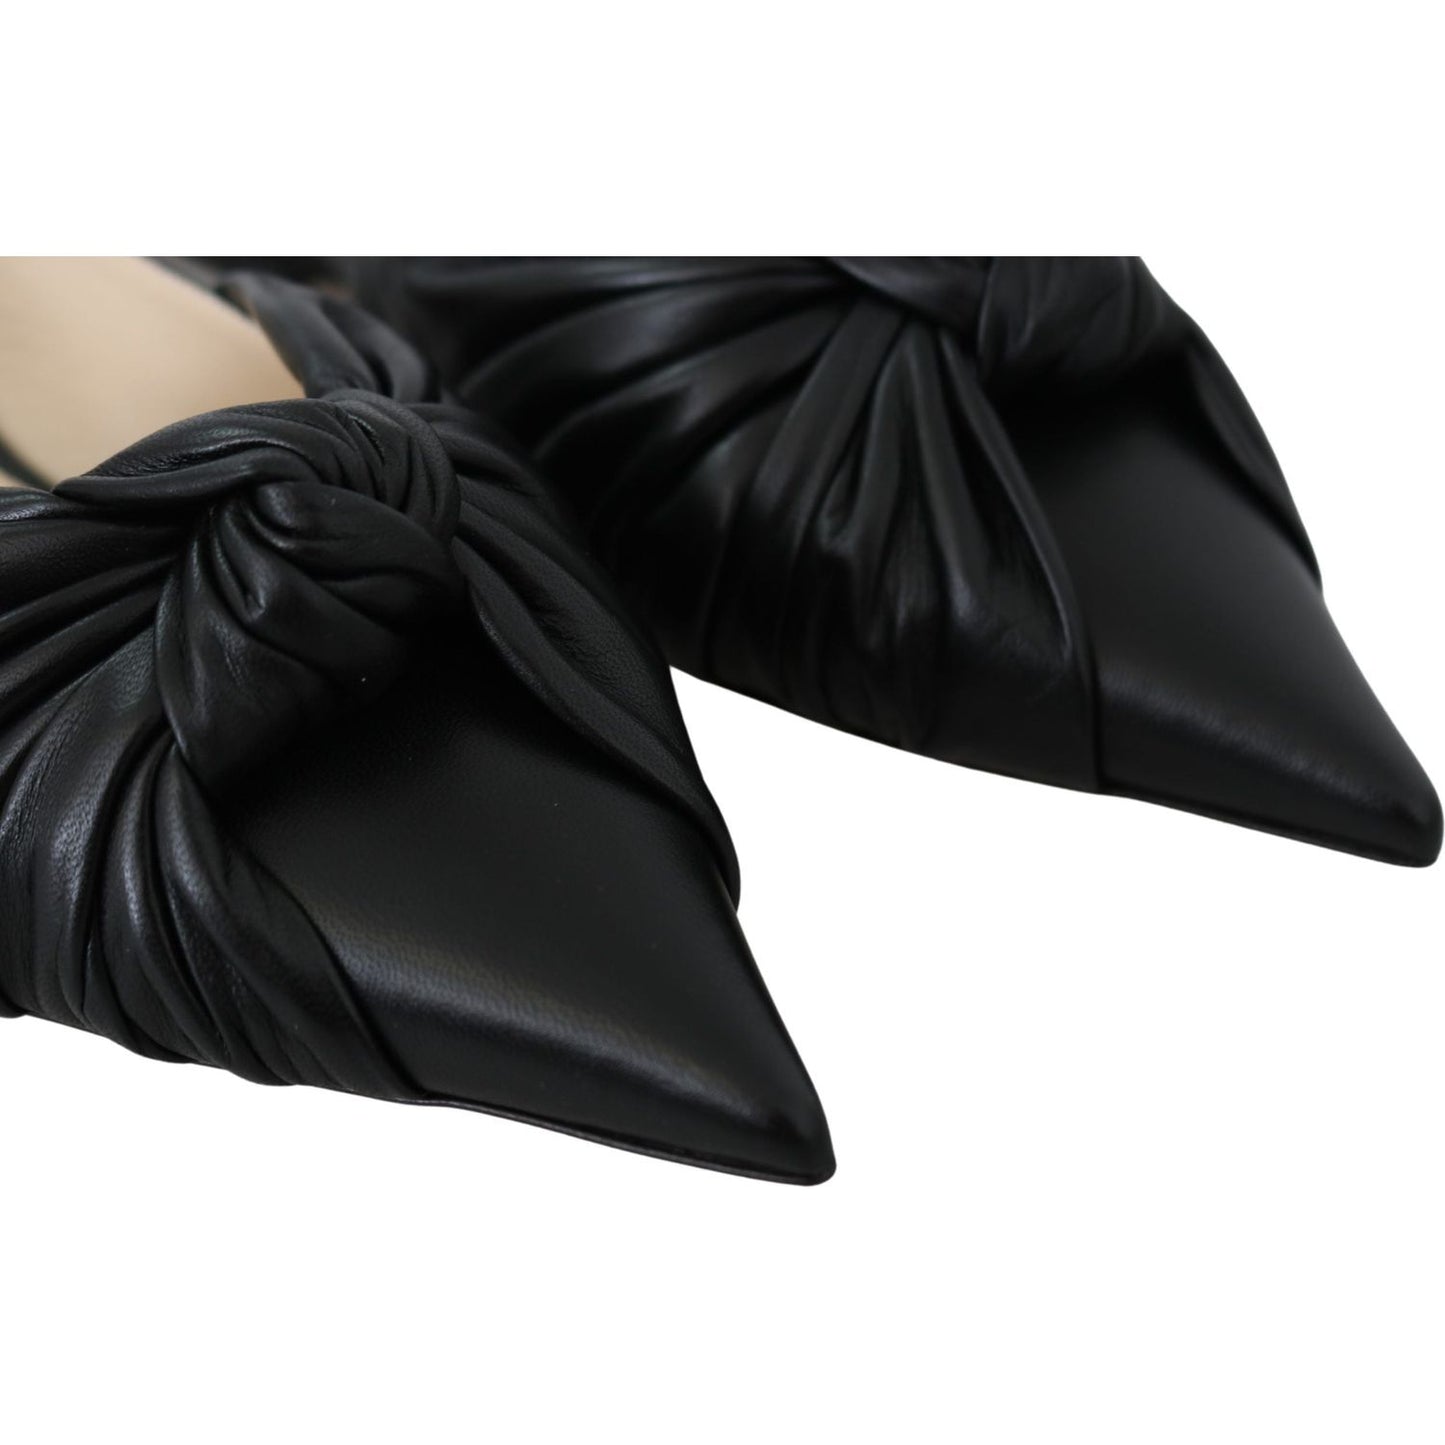 Jimmy Choo Elegant Pointed Toe Leather Flats Shoes annabell-black-leather-flat-shoes